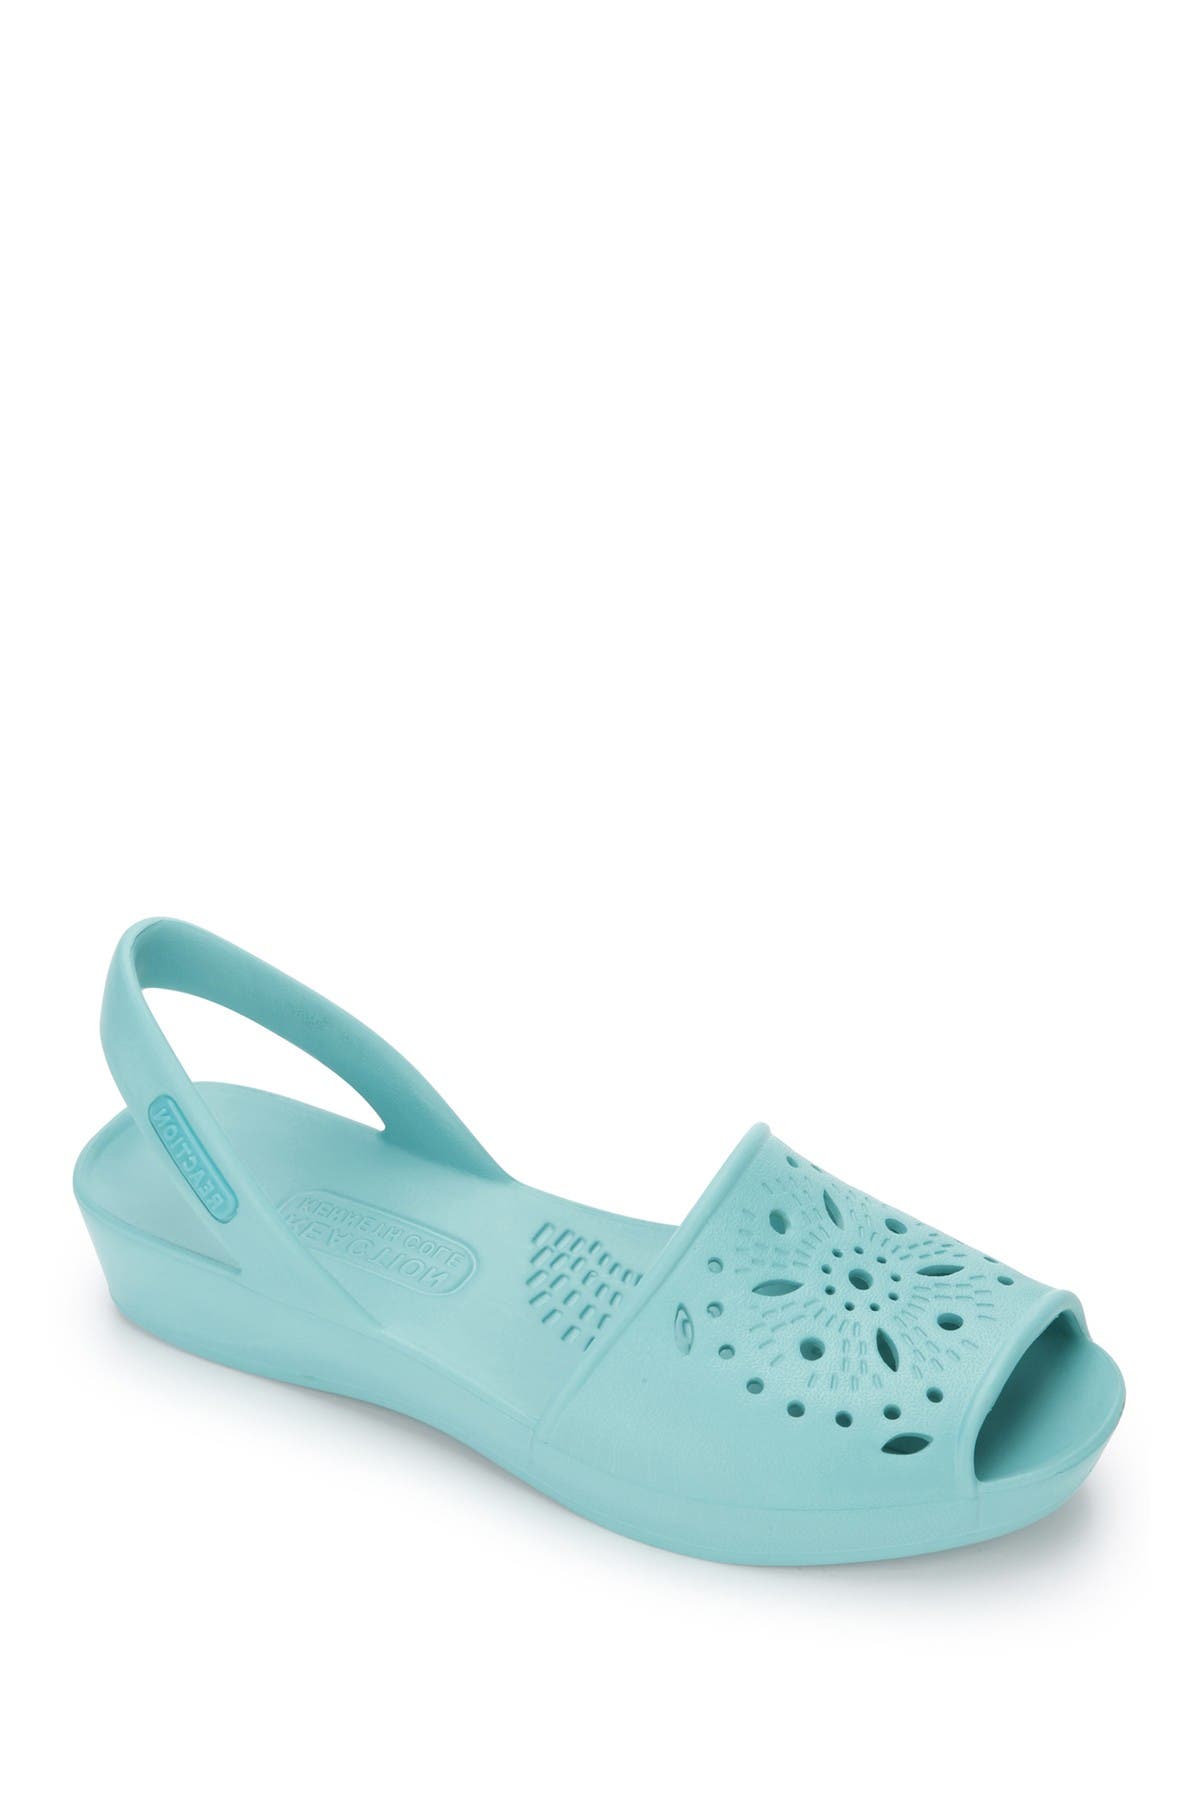 Kenneth Cole Reaction Fine Perforated Slingback Sandal In Turquoise/aqua3